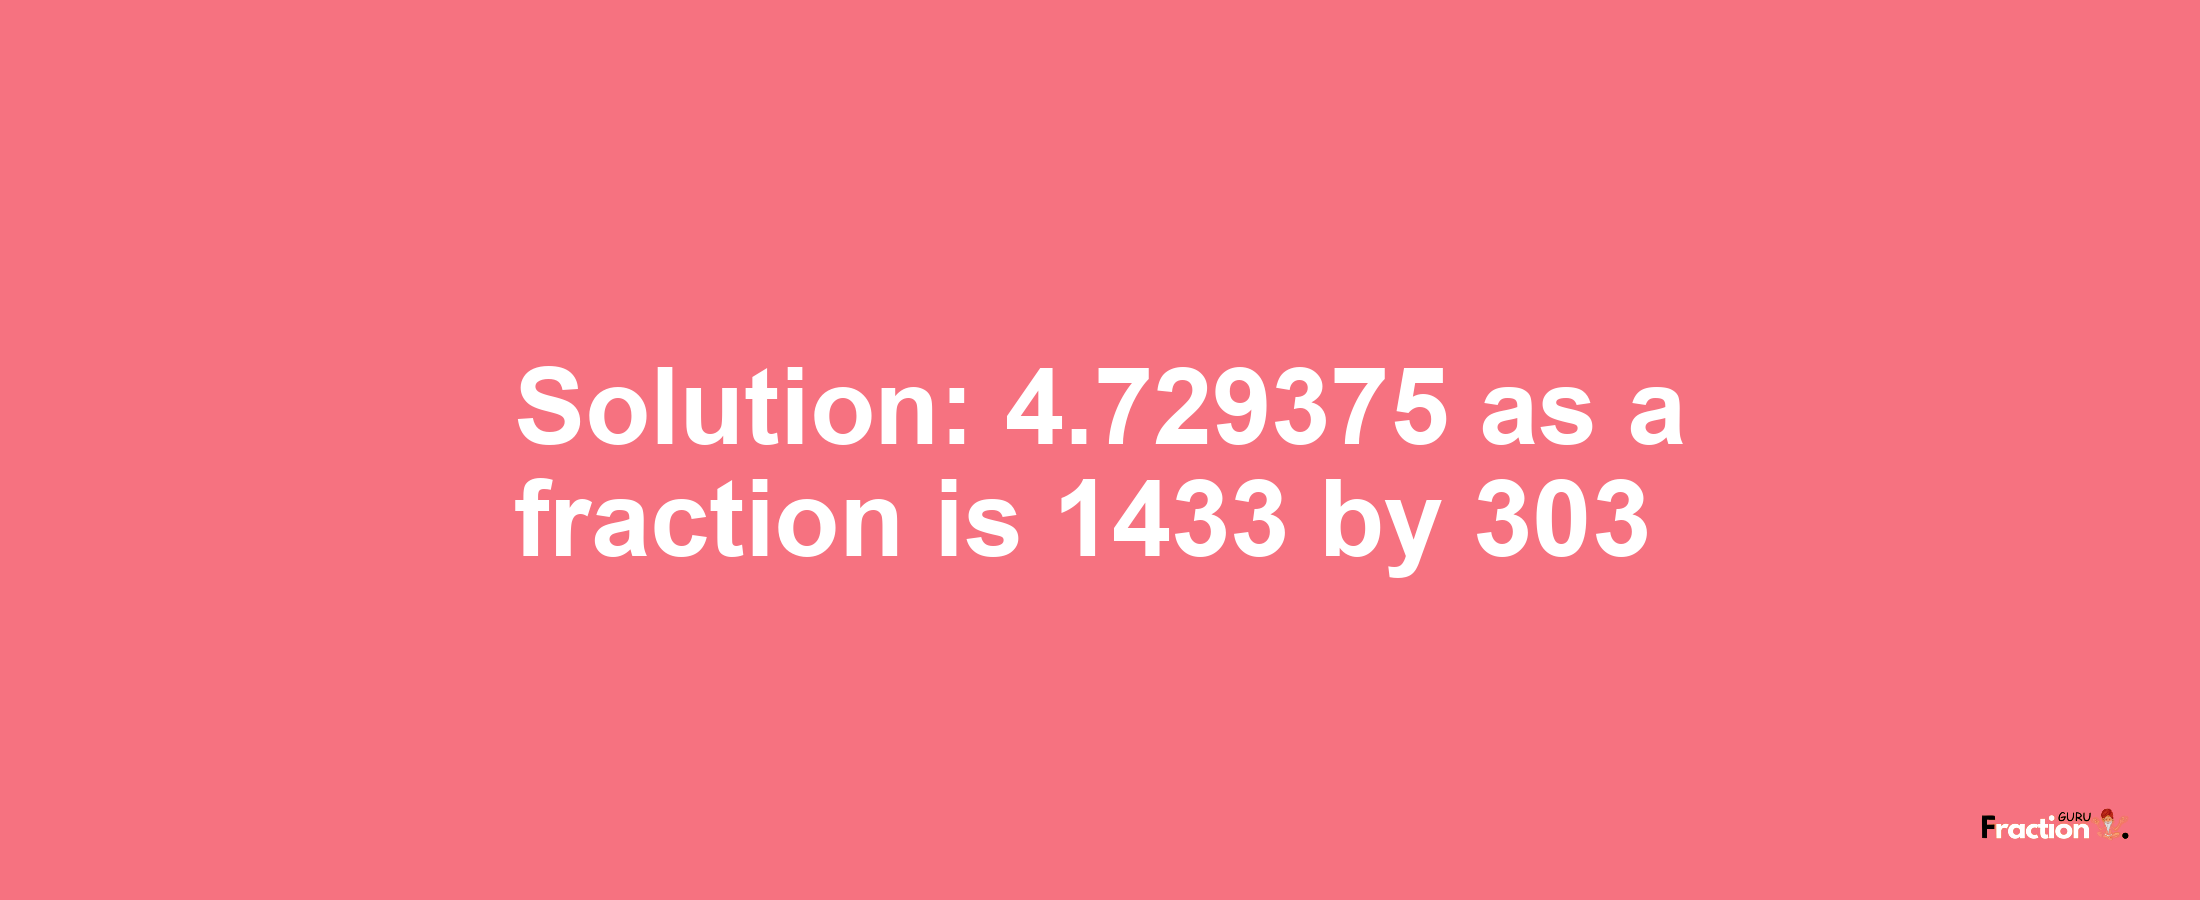 Solution:4.729375 as a fraction is 1433/303